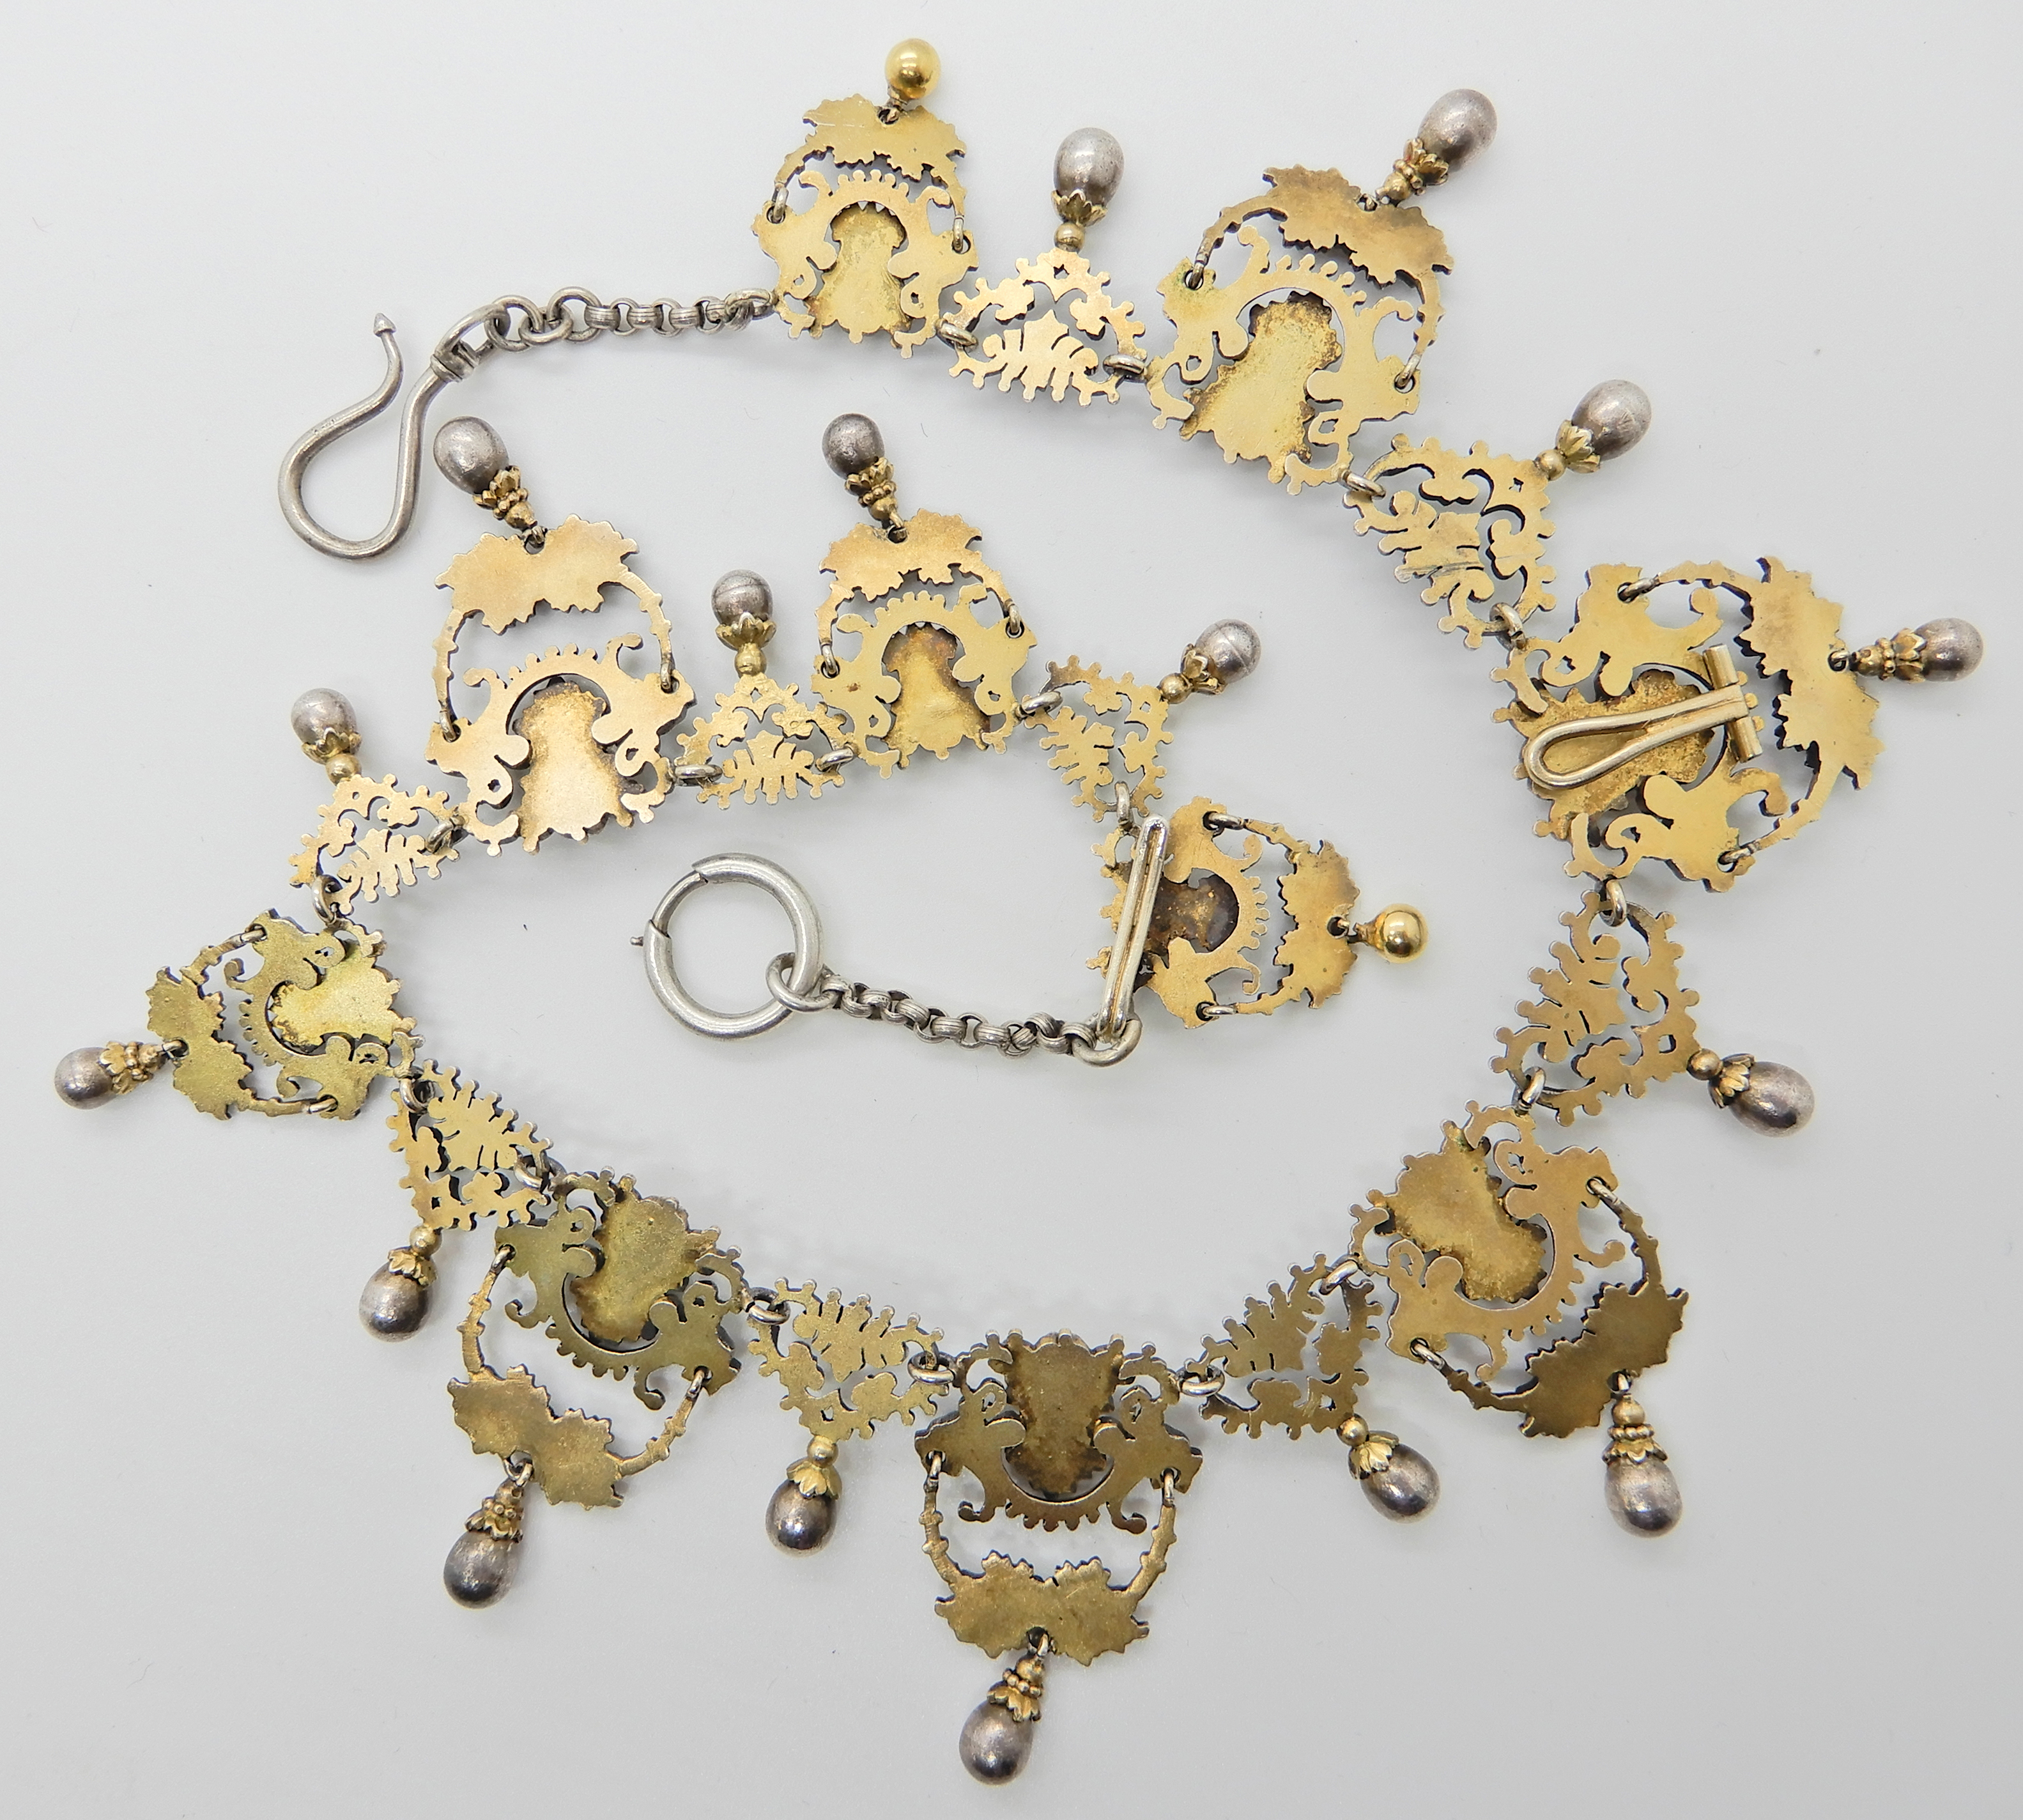 A gilded white metal Gothic design necklace with lion heads and 'Pan' grotesque masks and roses, - Image 4 of 8